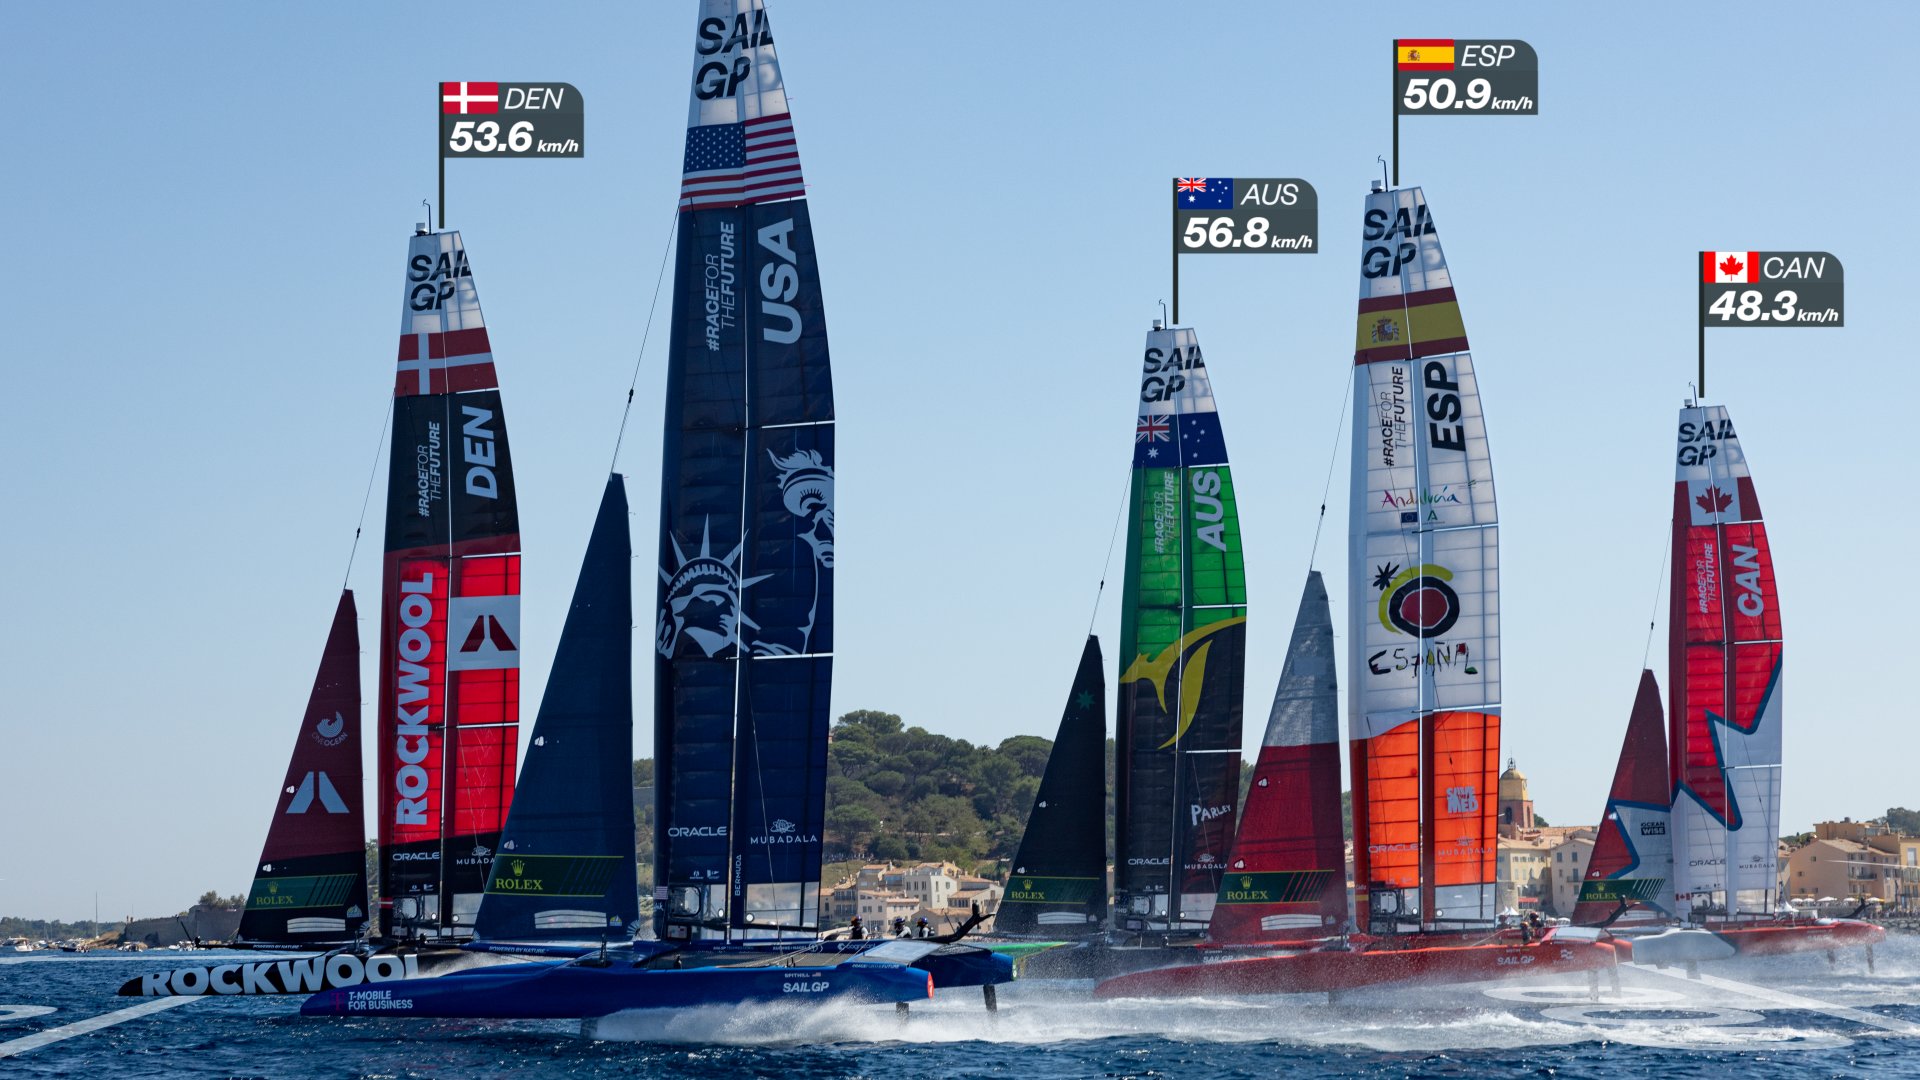 Excitement builds for SailGP’s New York return: Racecourse and schedule confirmed